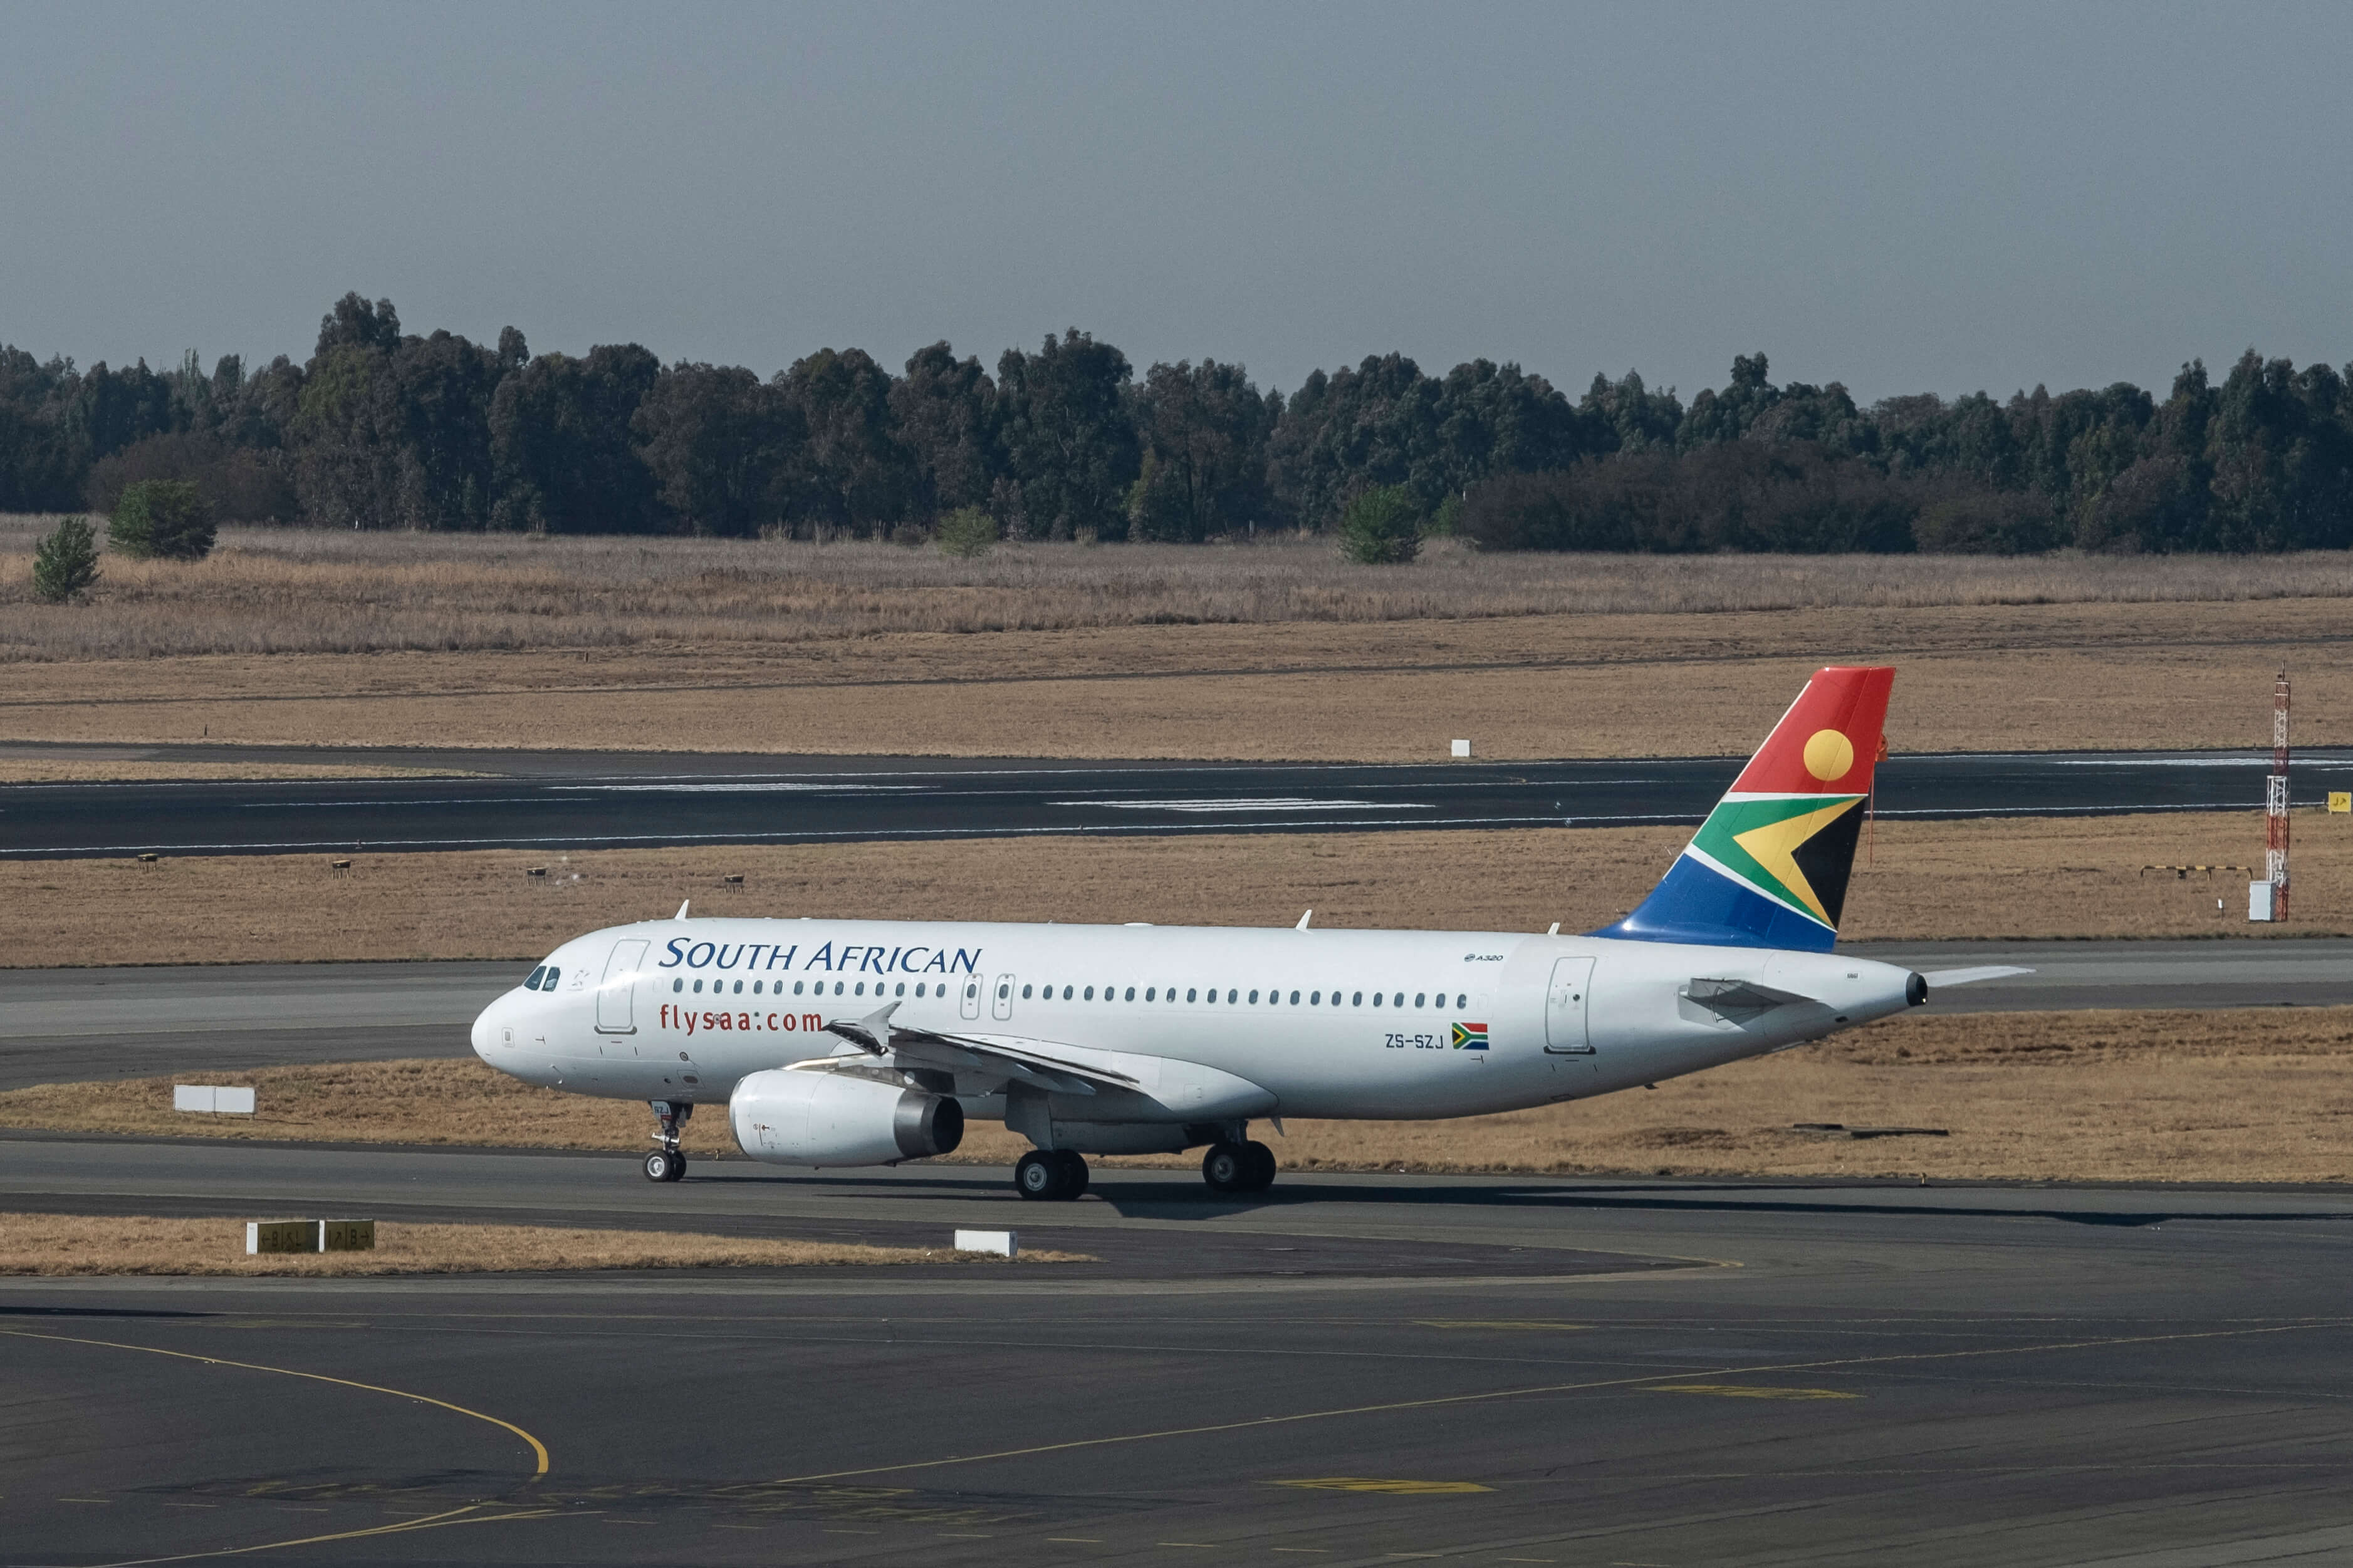 South Africa travel restriction